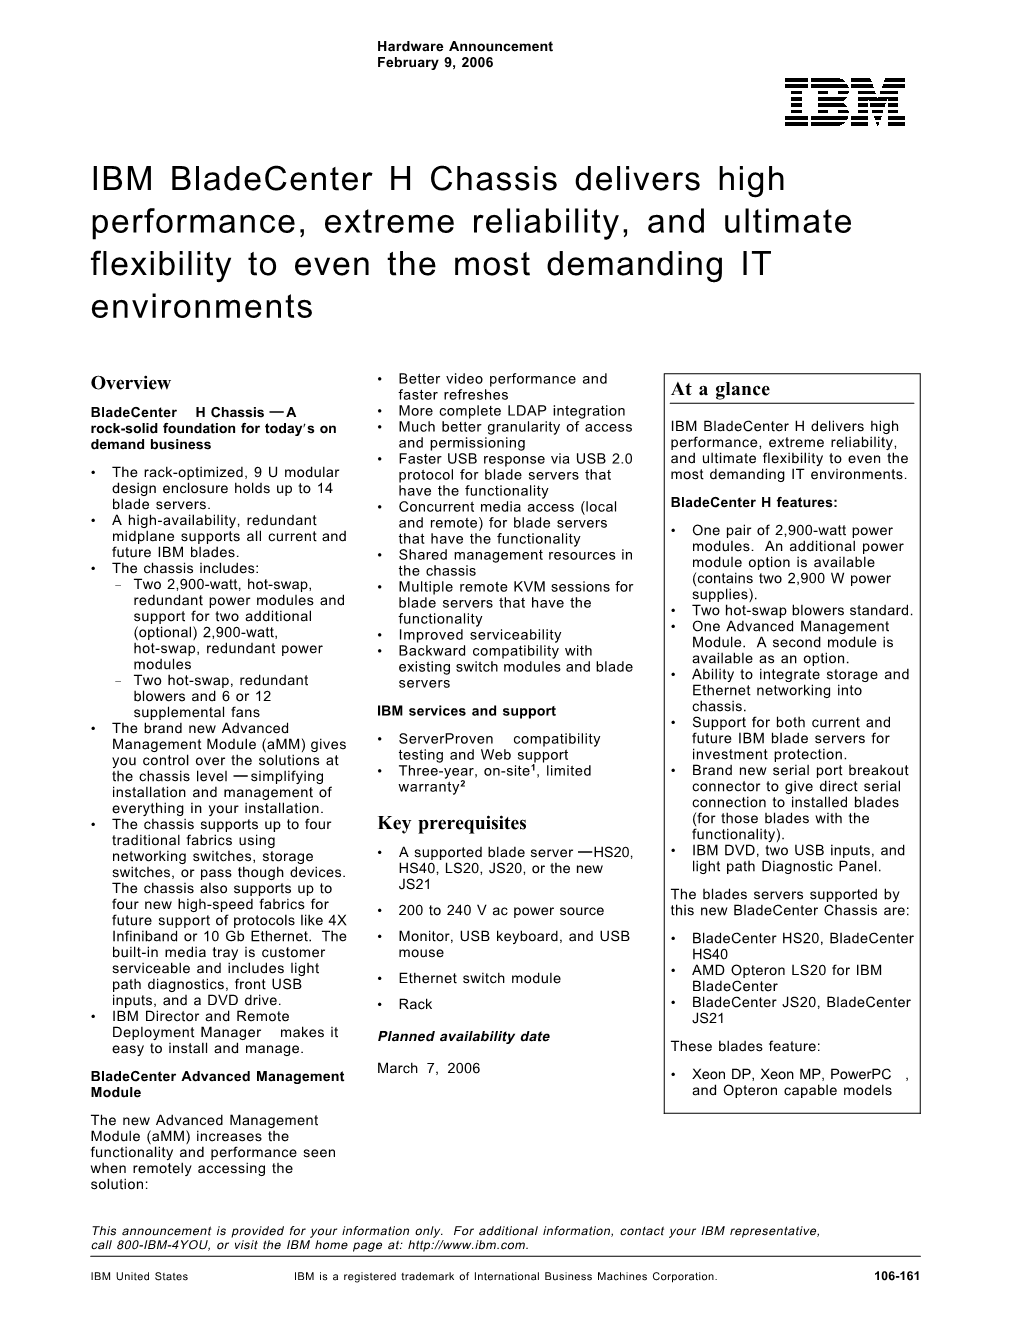 IBM Bladecenter H Chassis Delivers High Performance, Extreme Reliability, and Ultimate Flexibility to Even the Most Demanding IT Environments